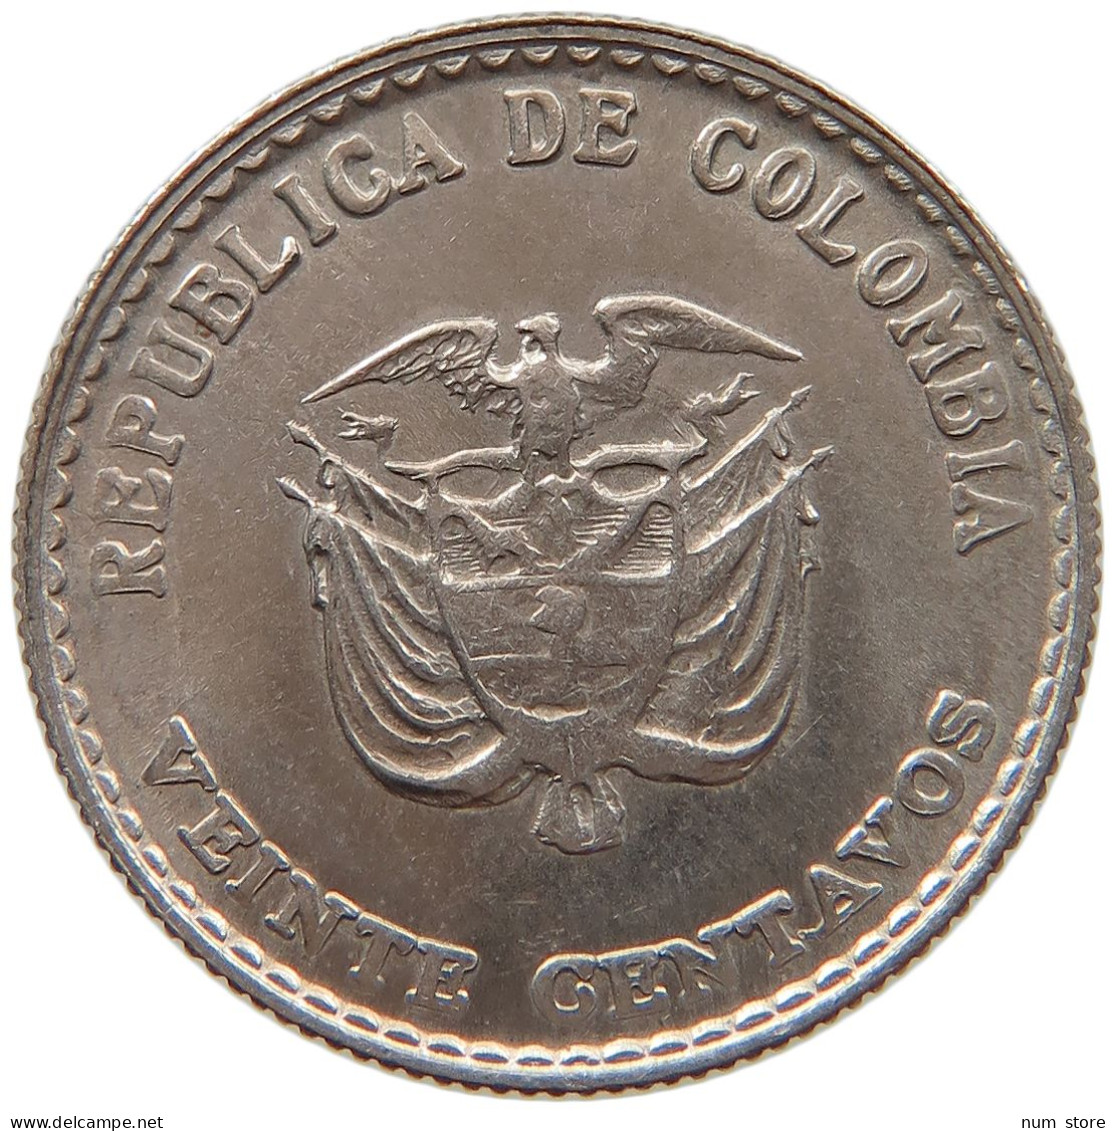 COLOMBIA 20 CENTAVOS 1965  #s030 0151 - Colombie